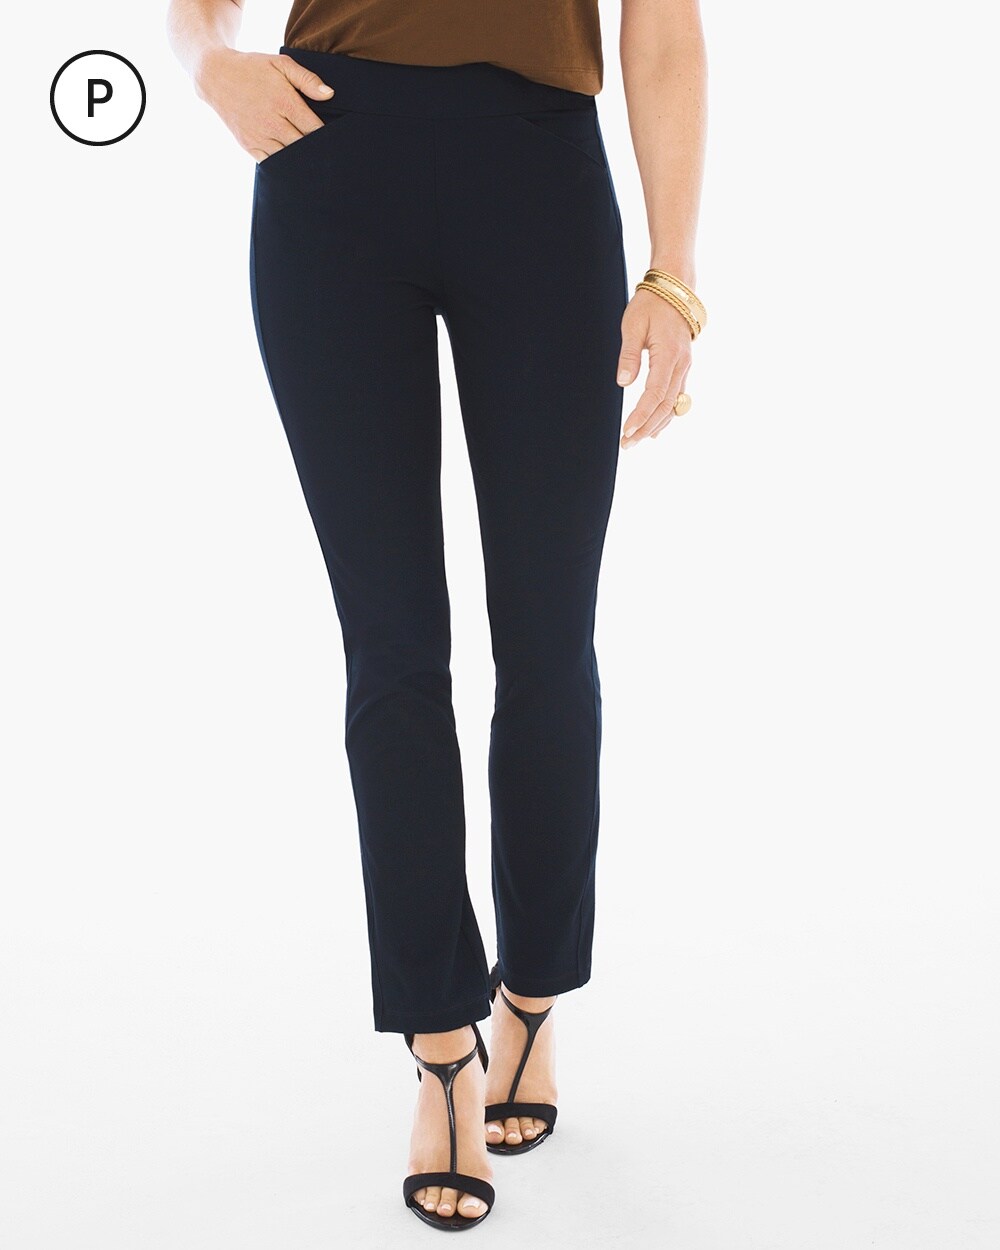 Travelers Collection Petite Crepe Pants